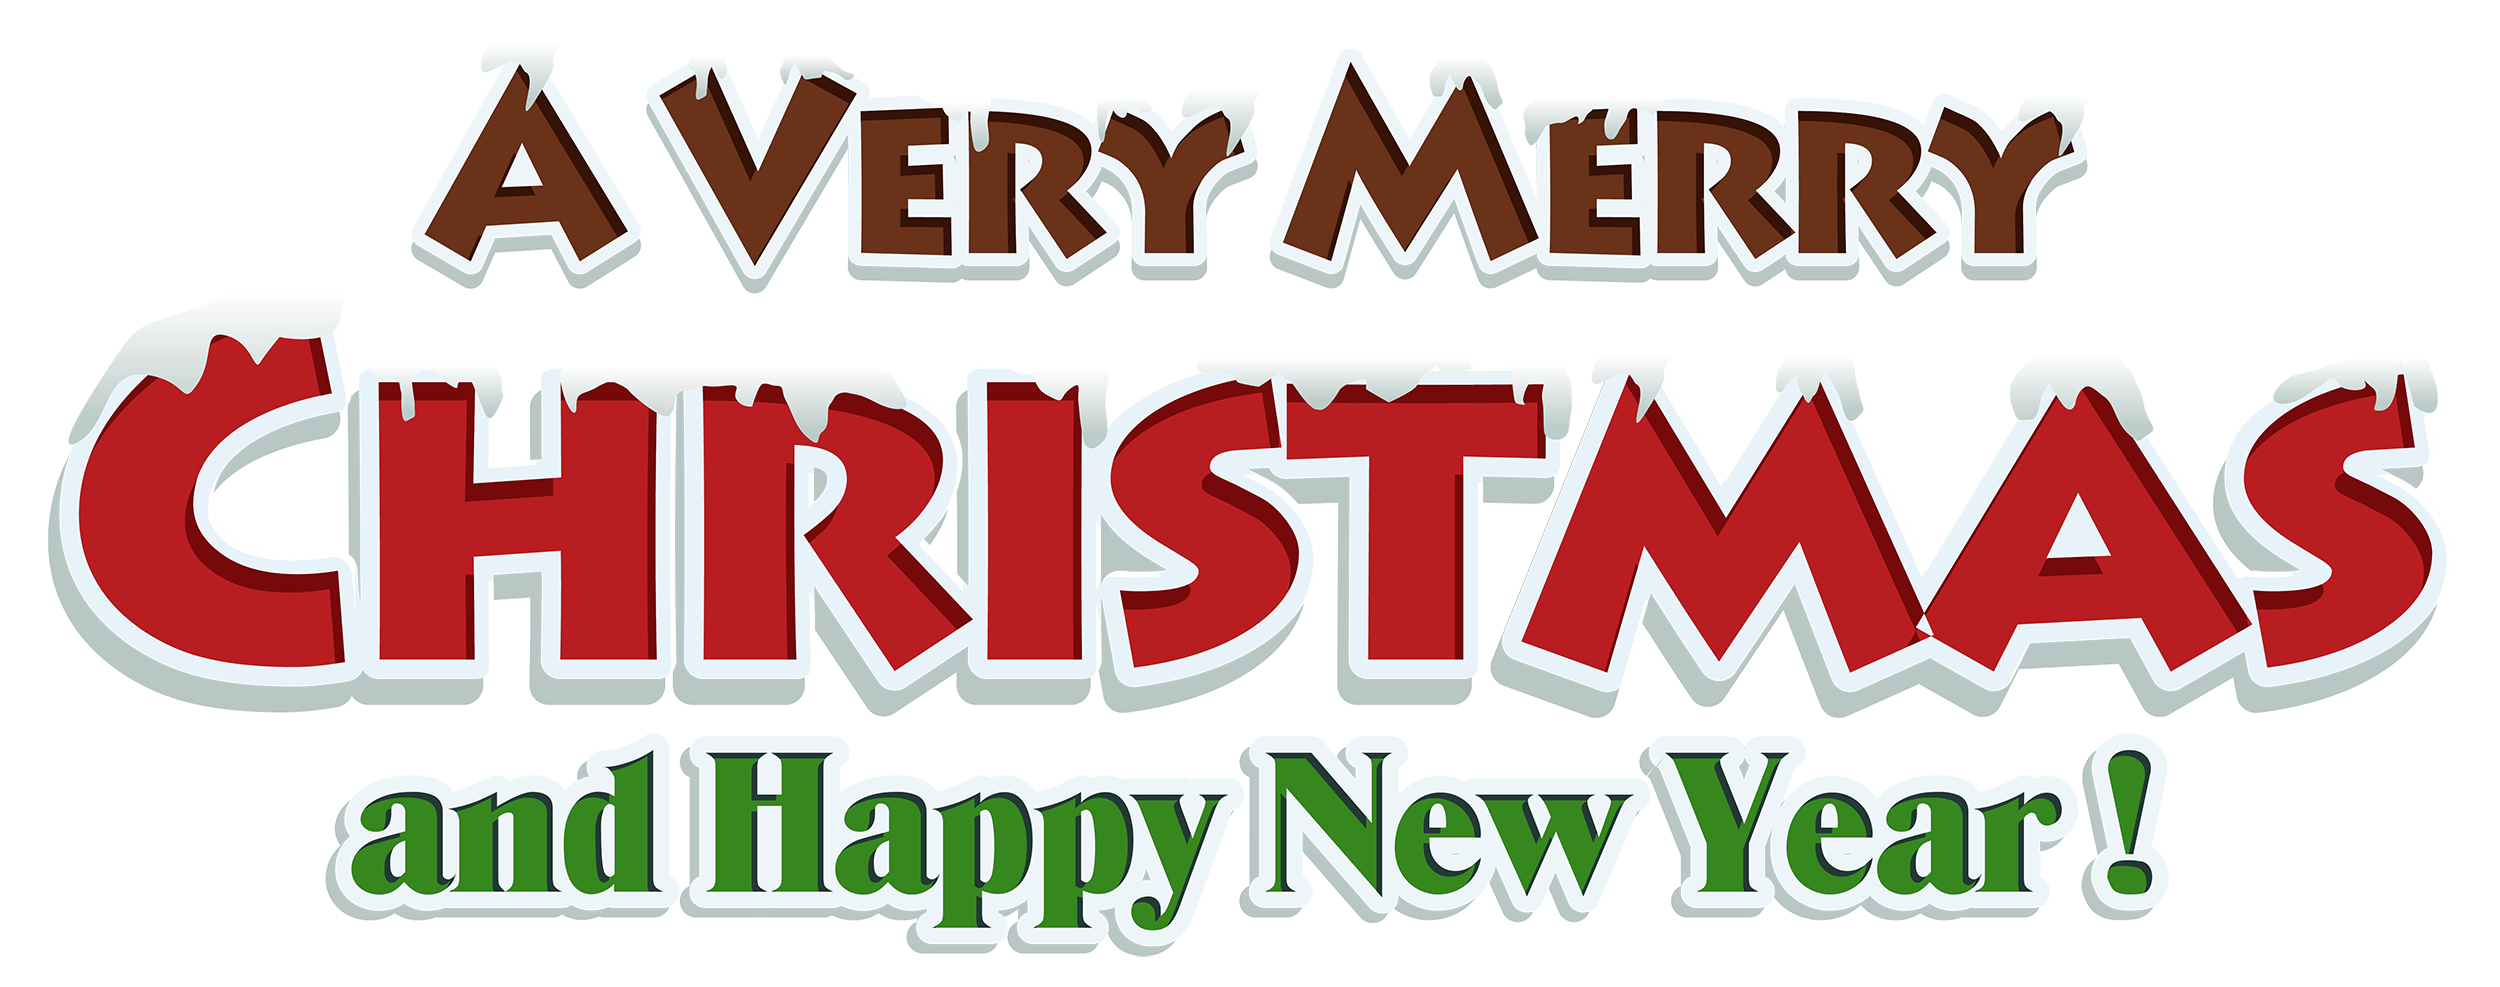 A Very Merry Christmas and Happy New Year PNG Image in Transparent pngteam.com